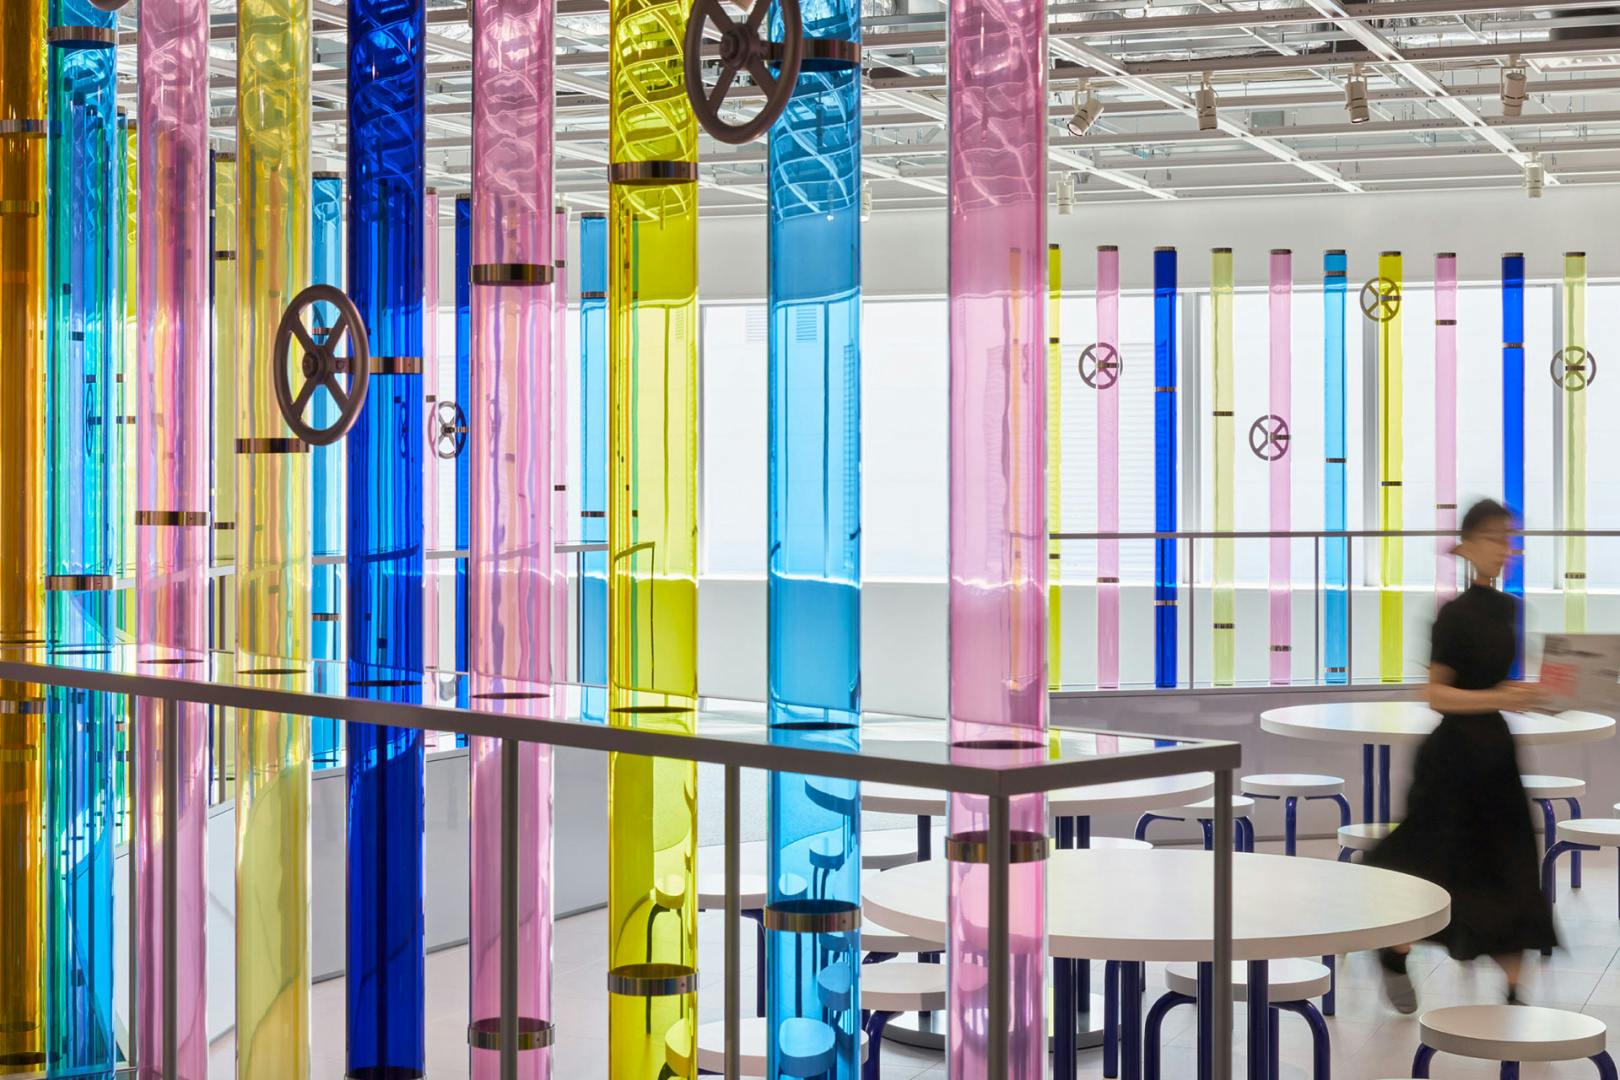 Photograph of Shiseido's Beauty Playground experience, showing large blue, yellow and pink glass panels that resemble test tubes